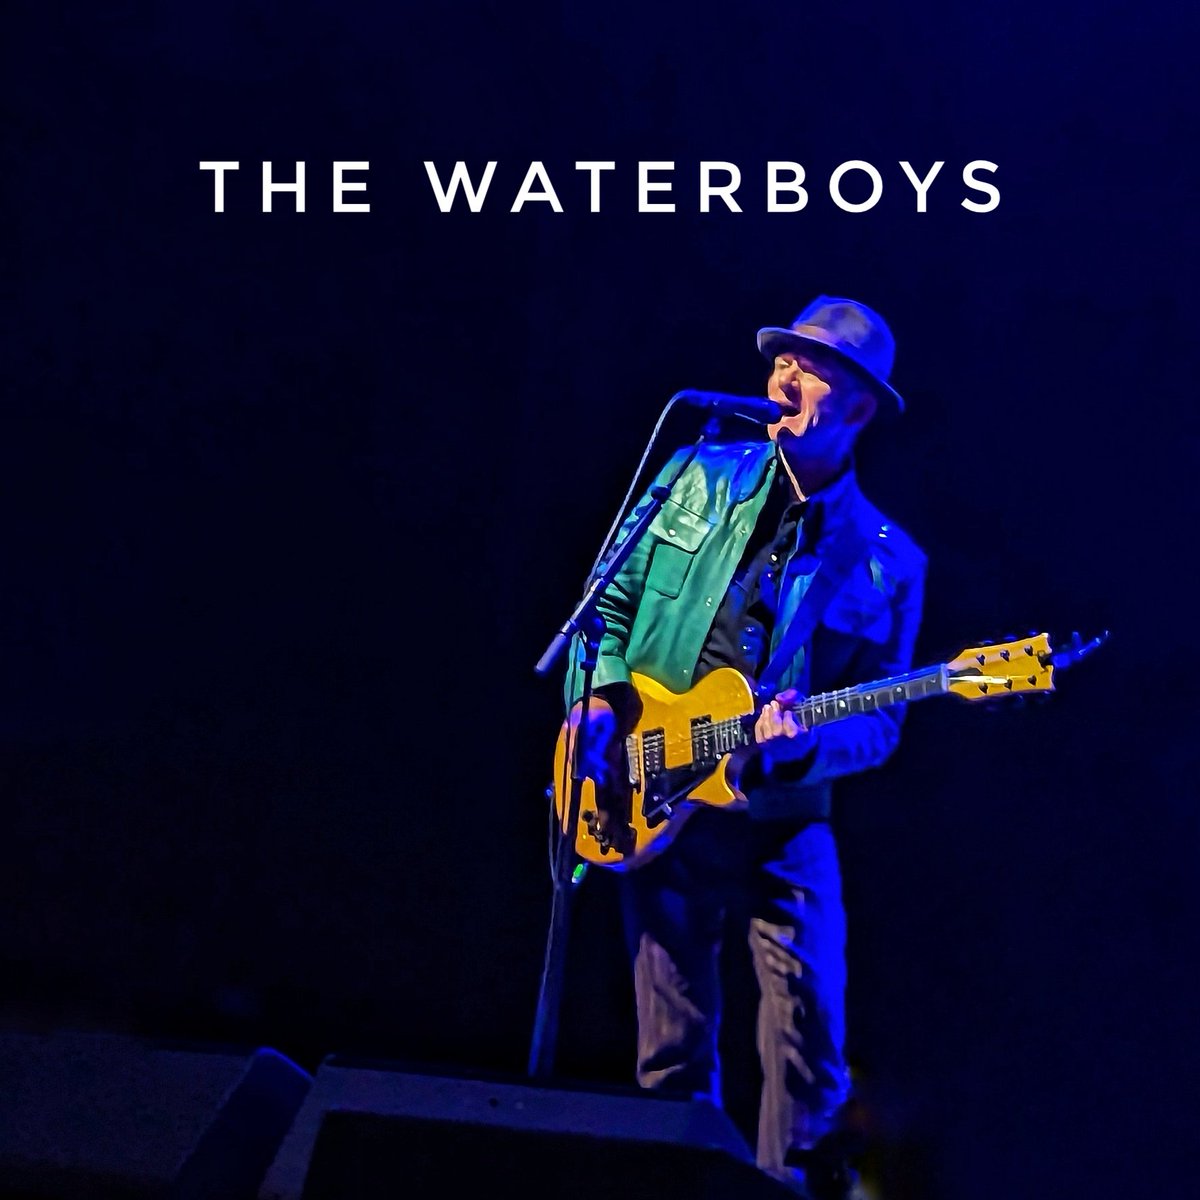 James Hallawell, guitar and pianos. The Waterboys live in action. Get yourself a ticket ! @MickPuck @HallawellJ @PAULBROWNAP63